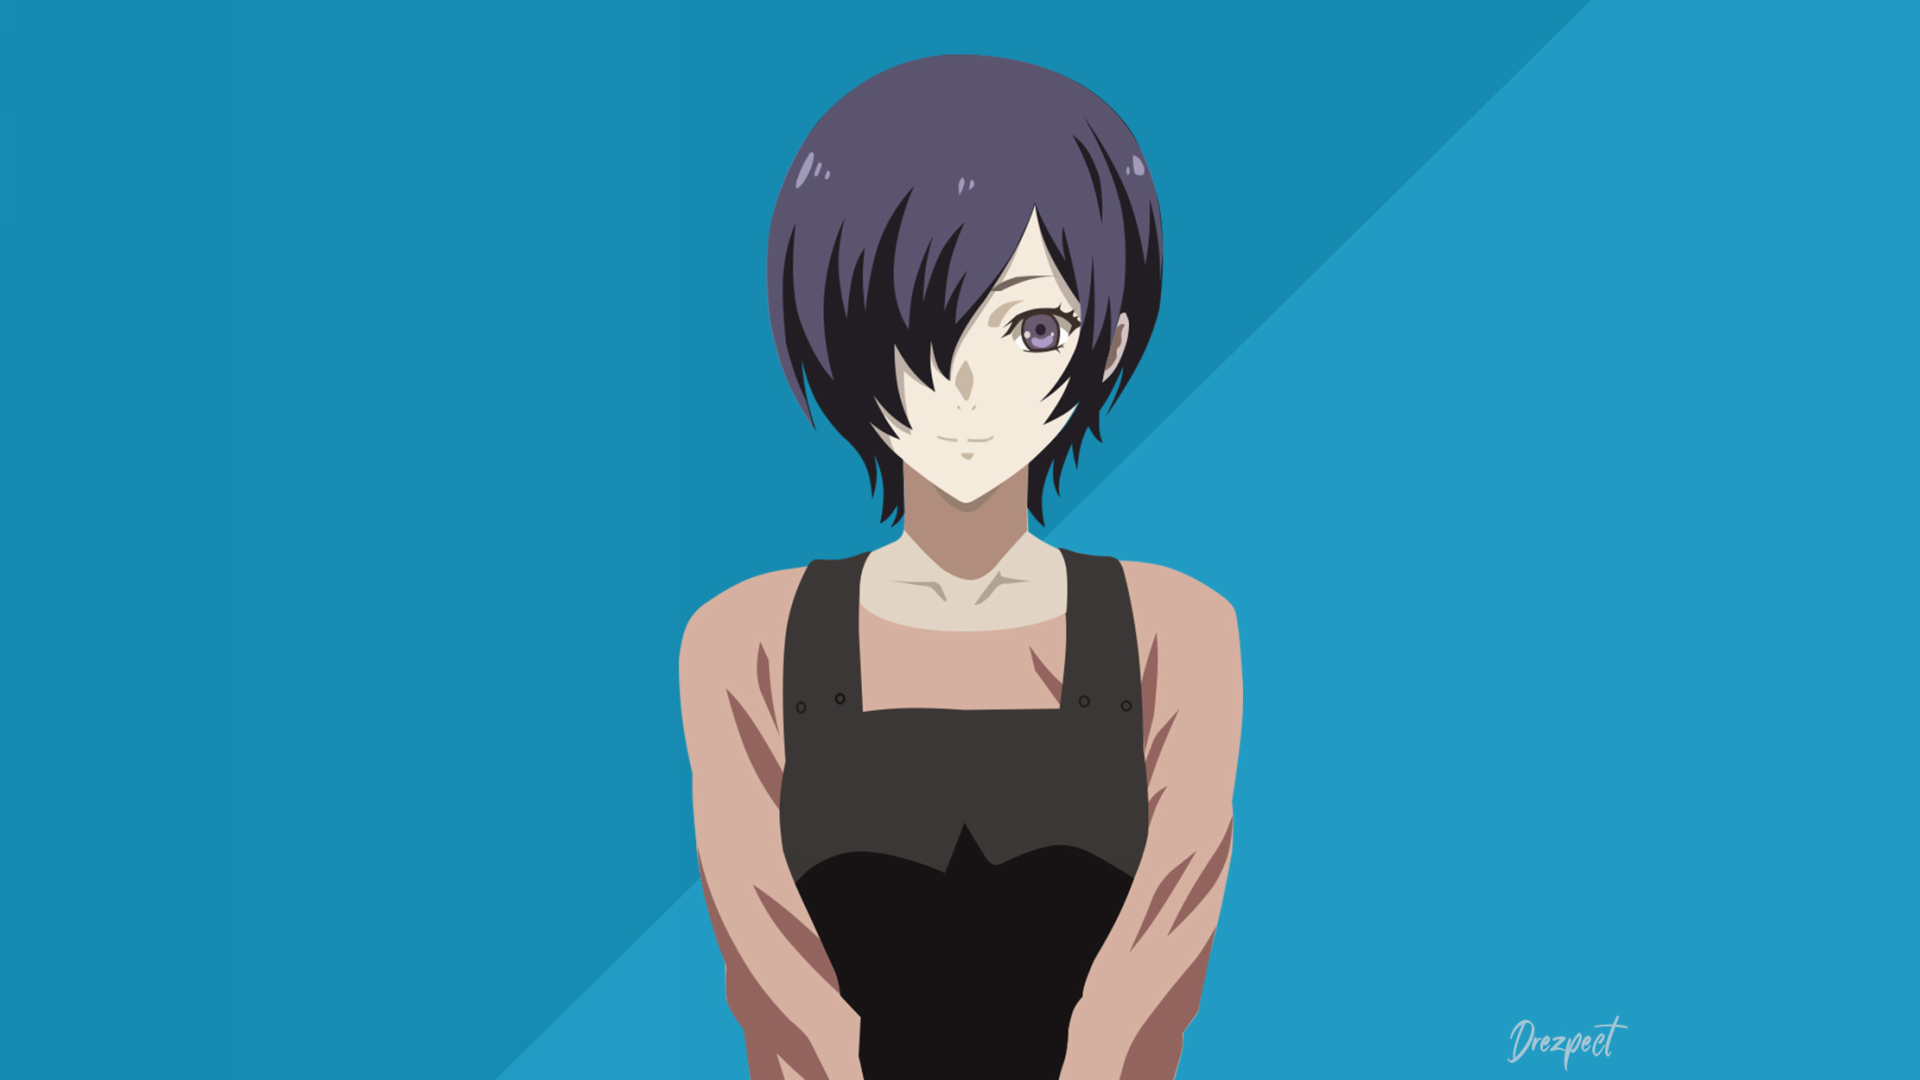 Free desktop wallpaper with Touka in resolution 1920x1080.